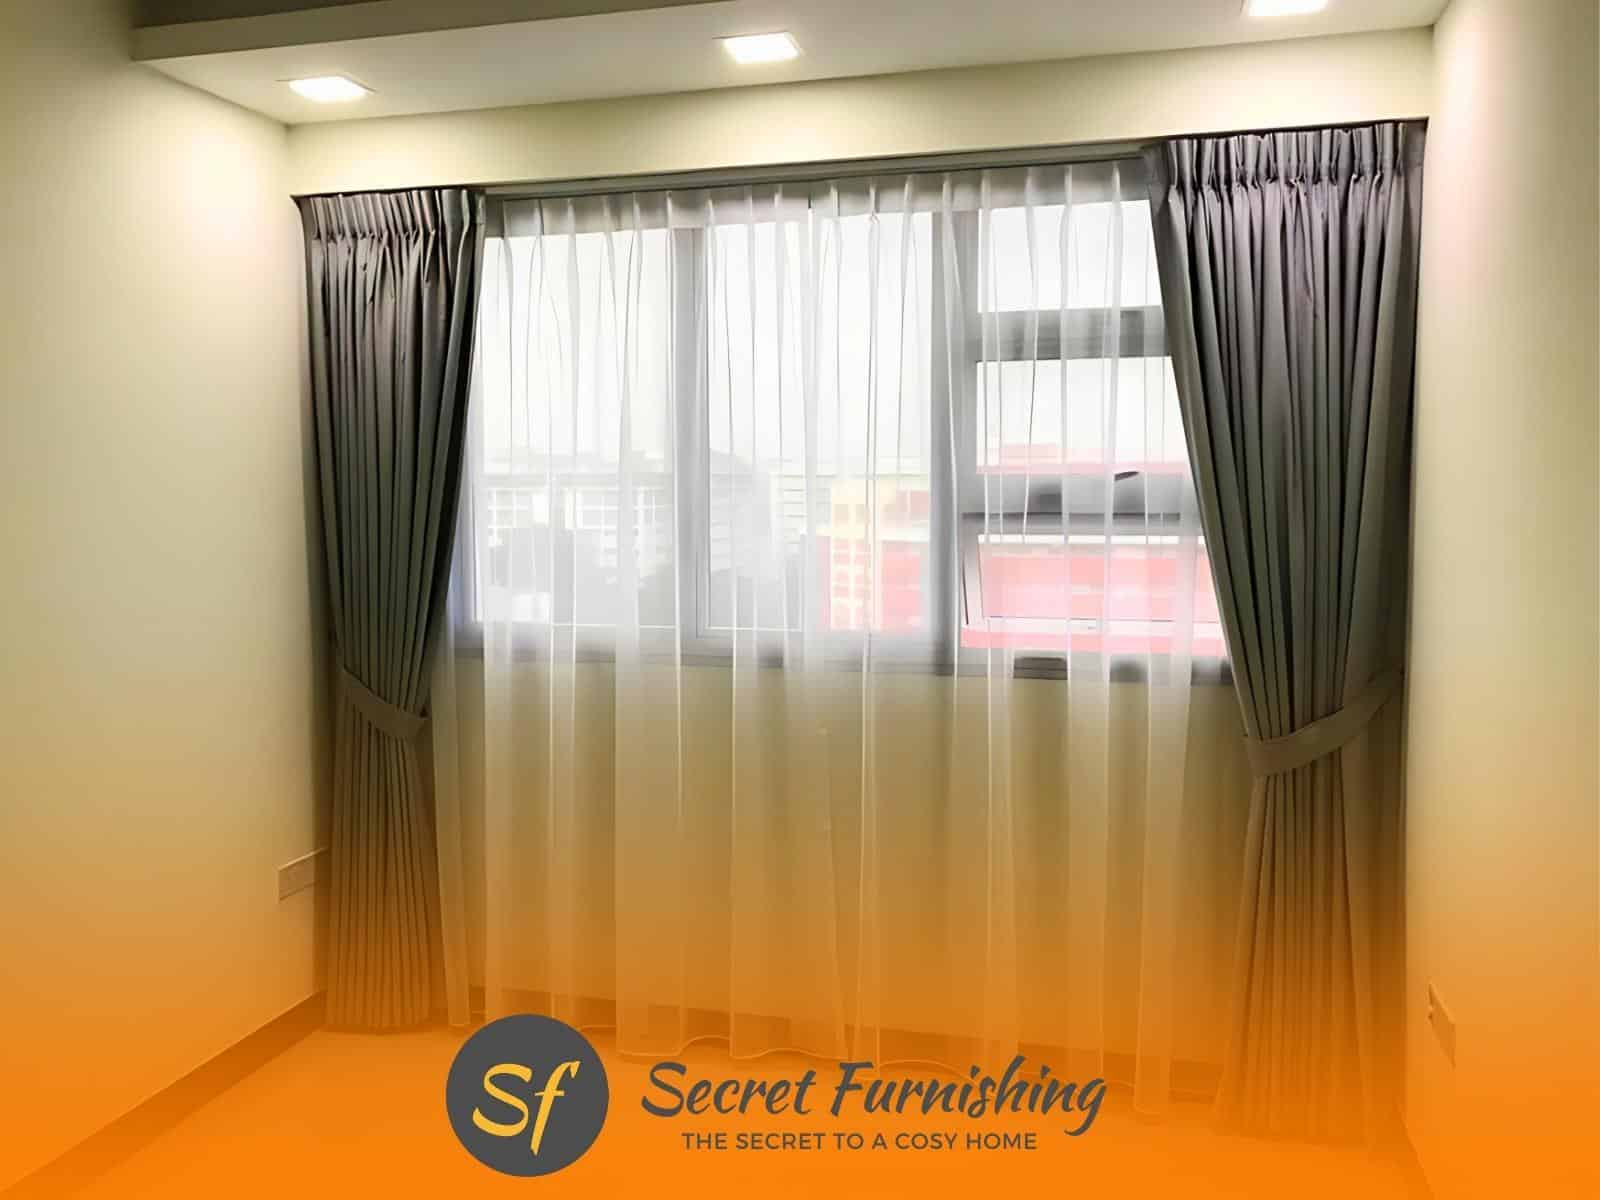 Curtain installation services in SG